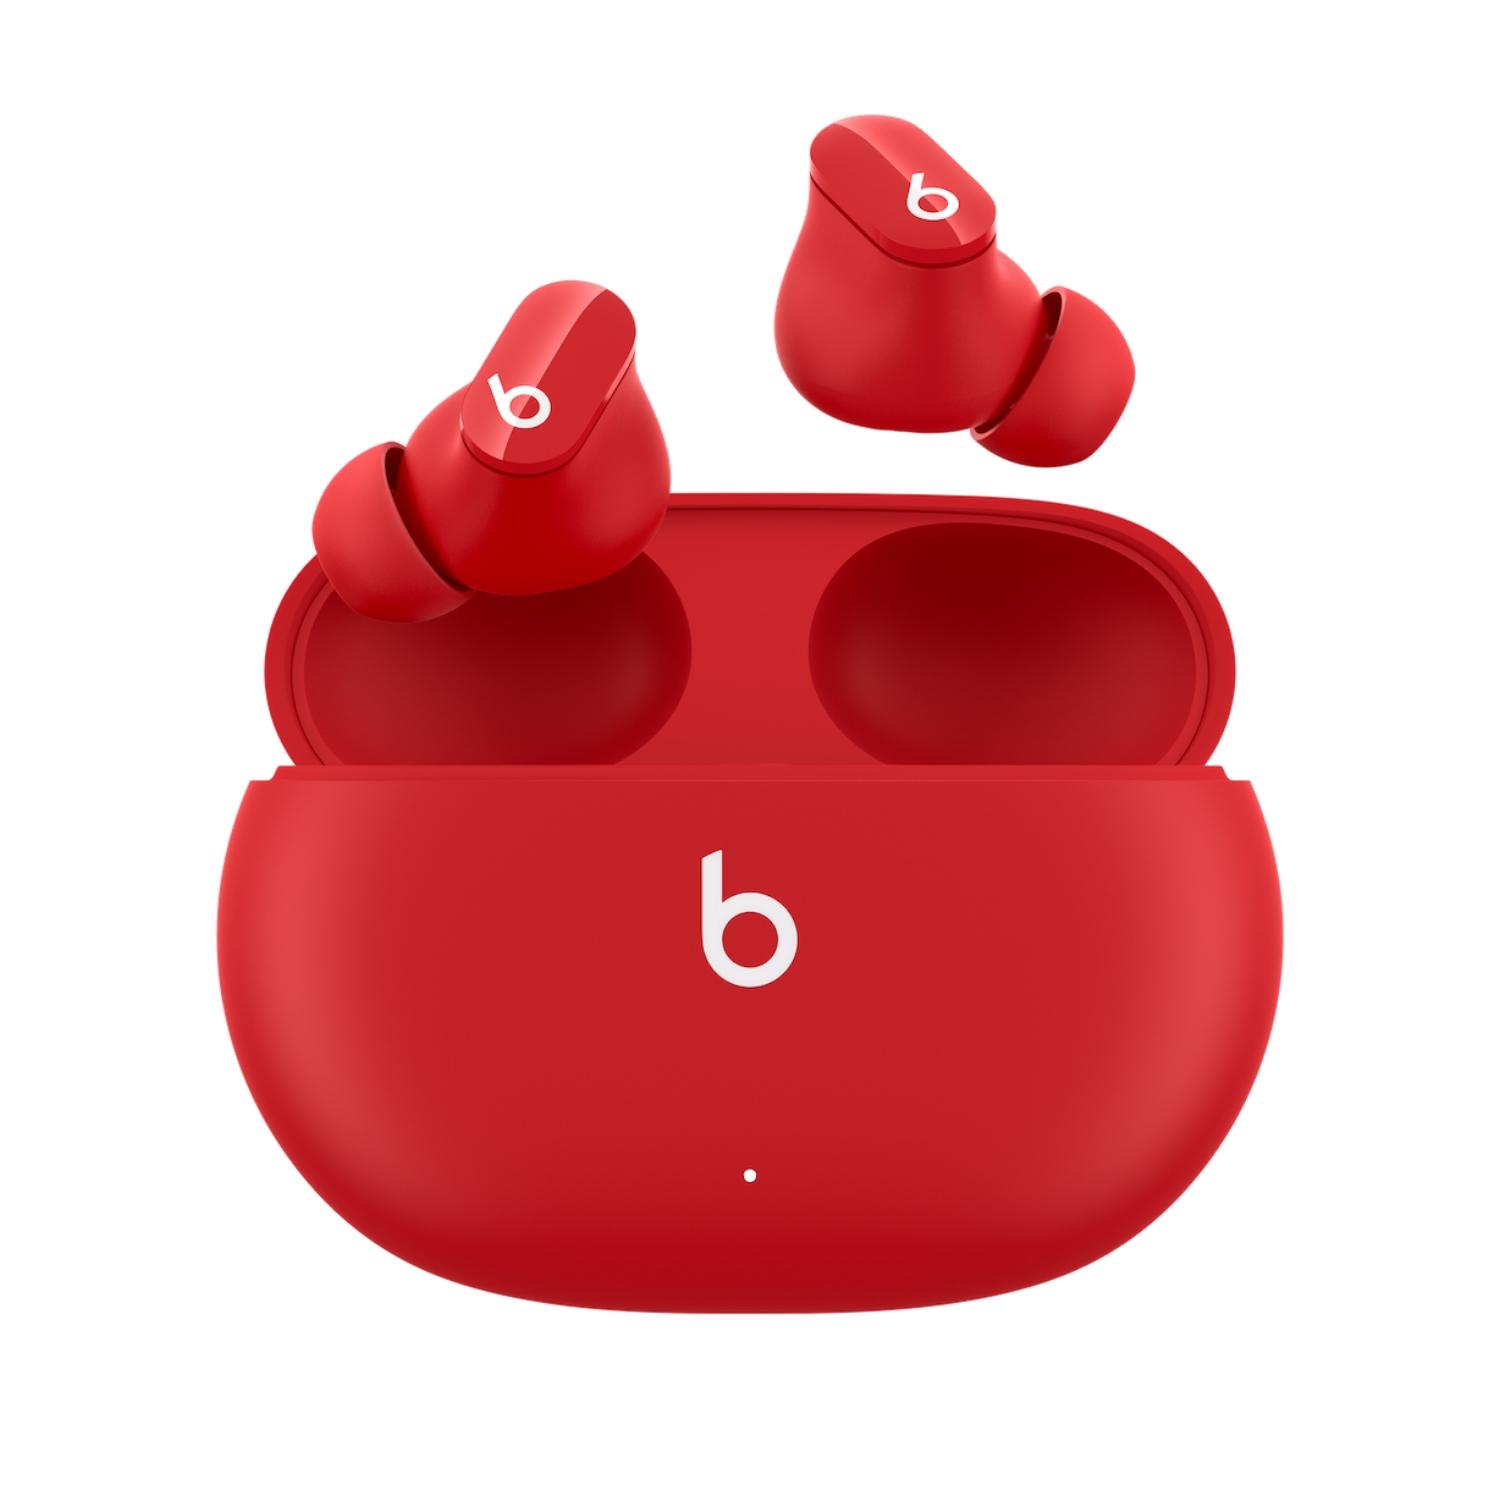 BEATS Studio Buds Wireless Bluetooth Noise-Cancelling Earbuds - Red, Red